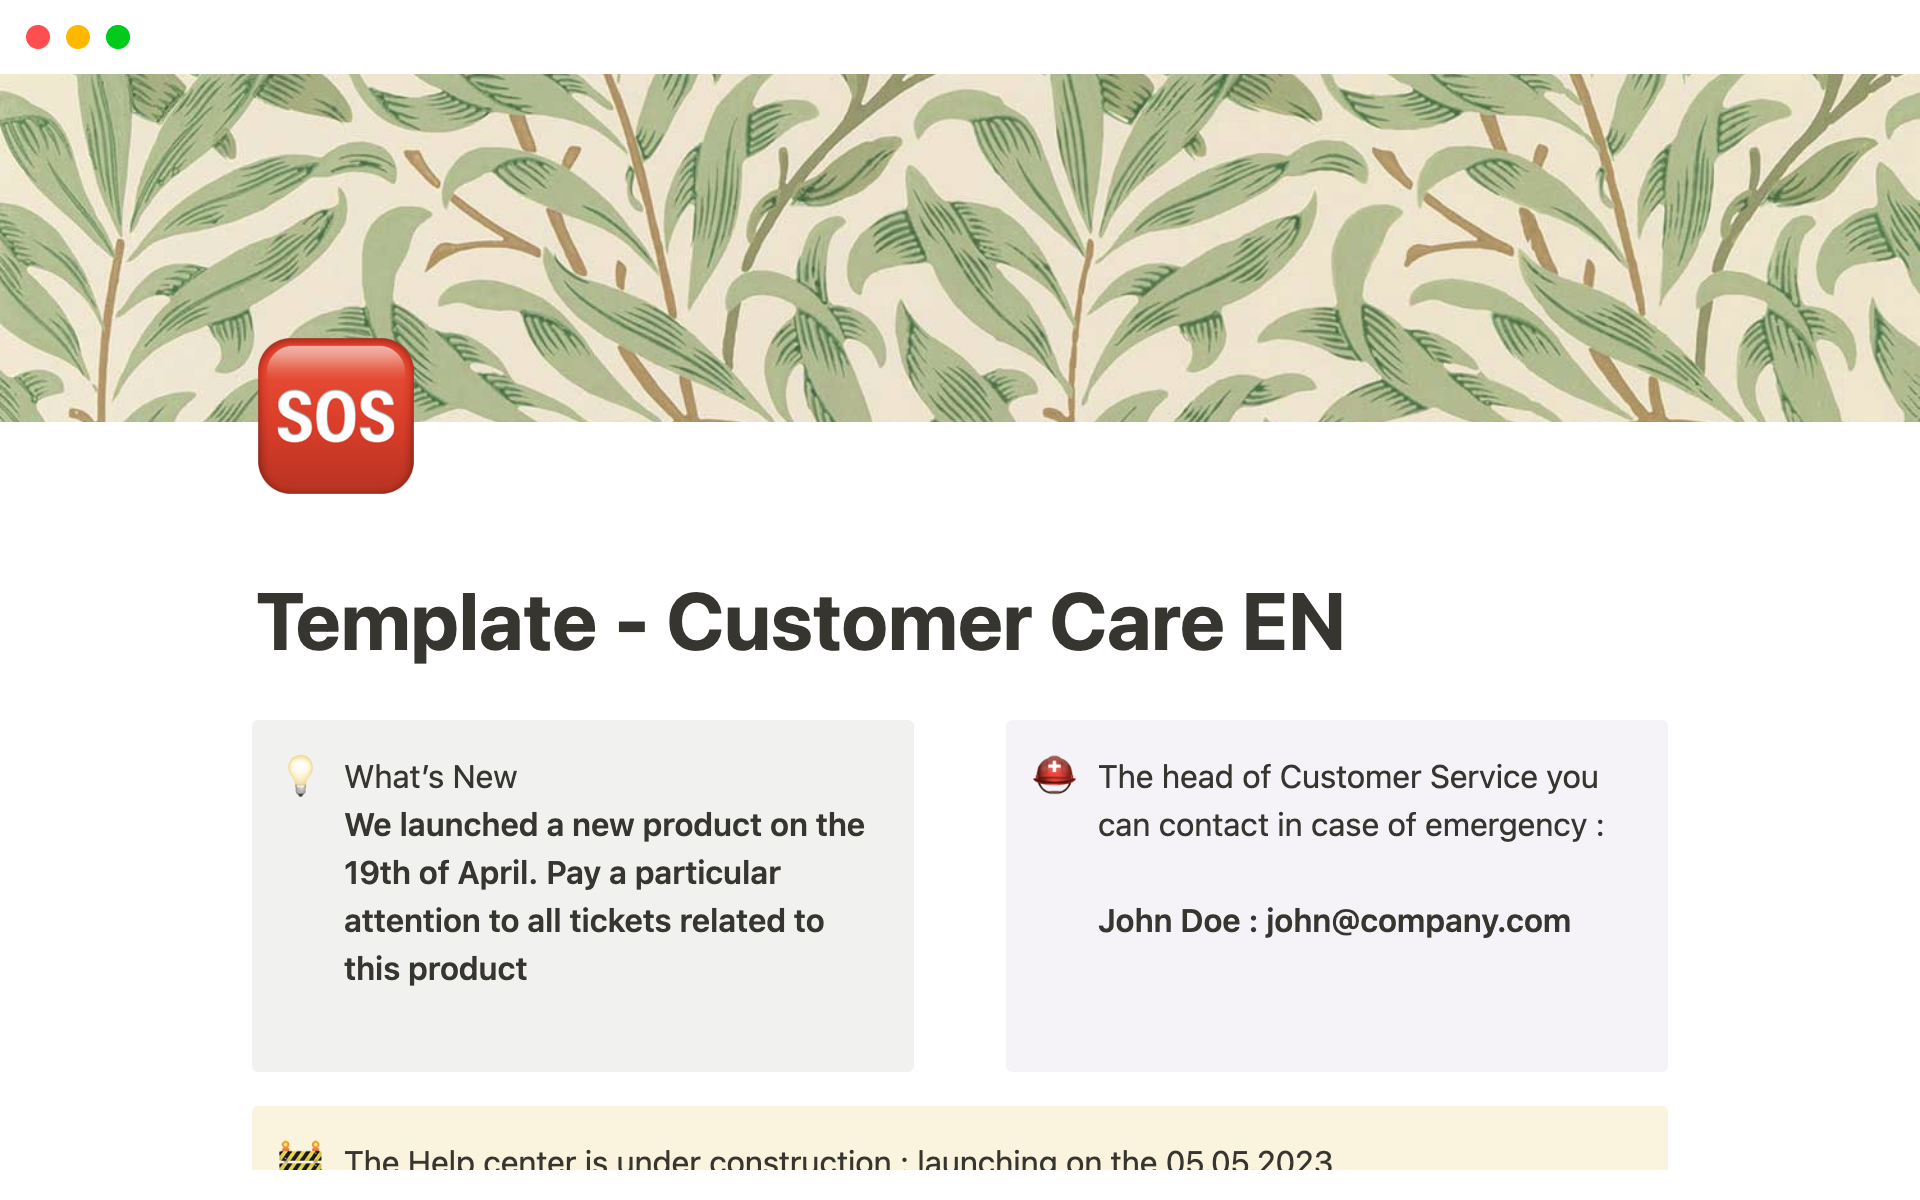 This template will help you organize your customer service. You can follow your customer claims and find solution quickly for technical & logistics issues